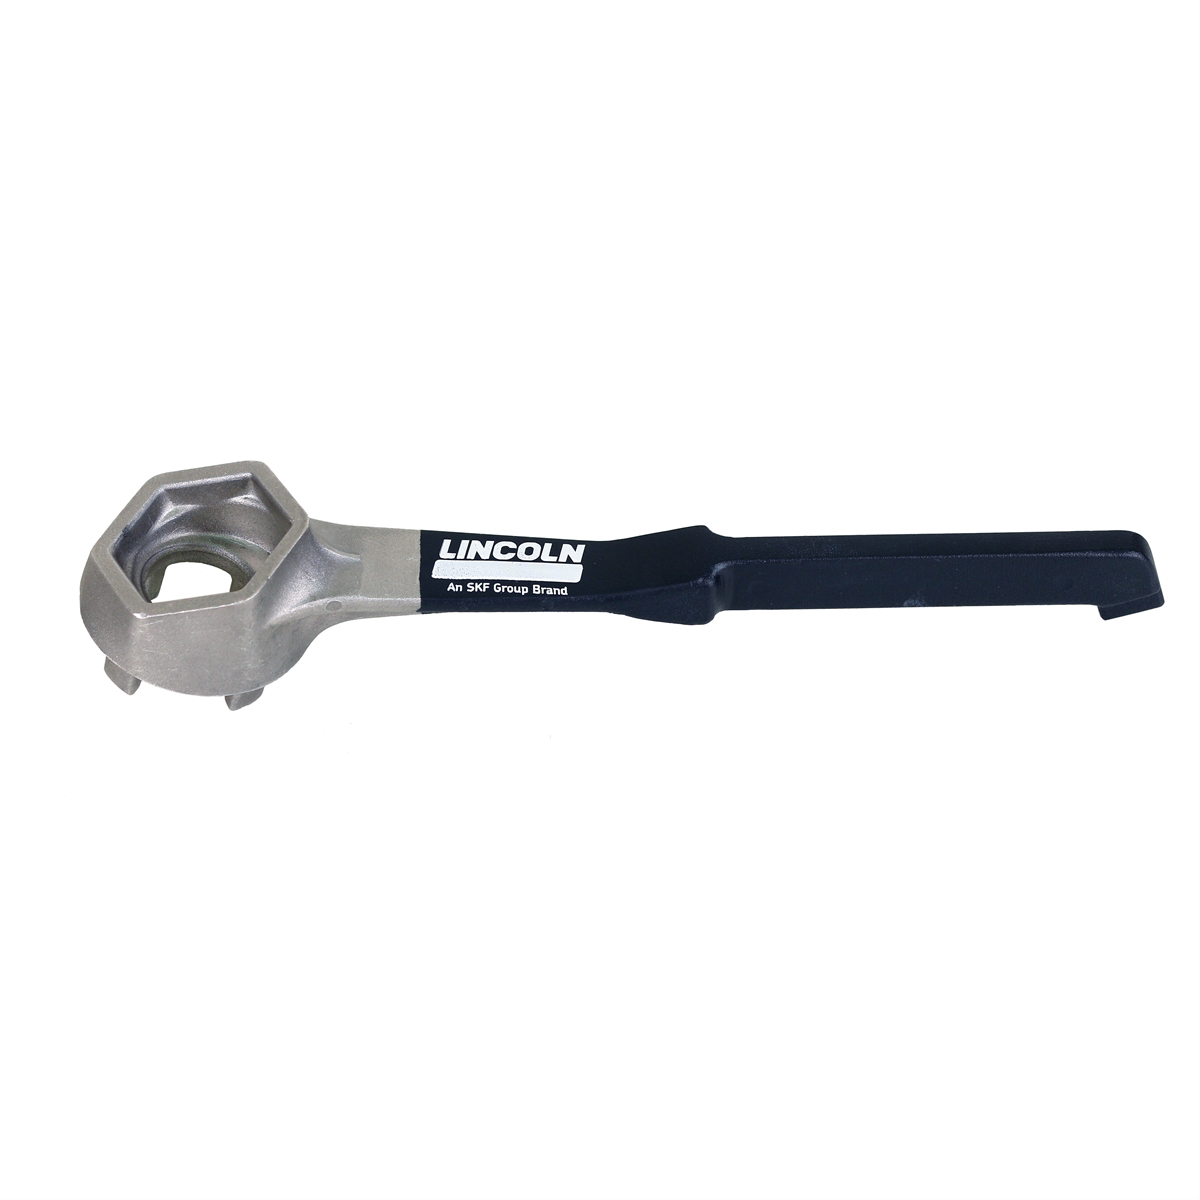 Lincoln 5841 Aluminum Drum Plug Bung Wrench for 15, 20, 30 and 55 Gallon Barrels with 2 Inch Bungs - image 1 of 6